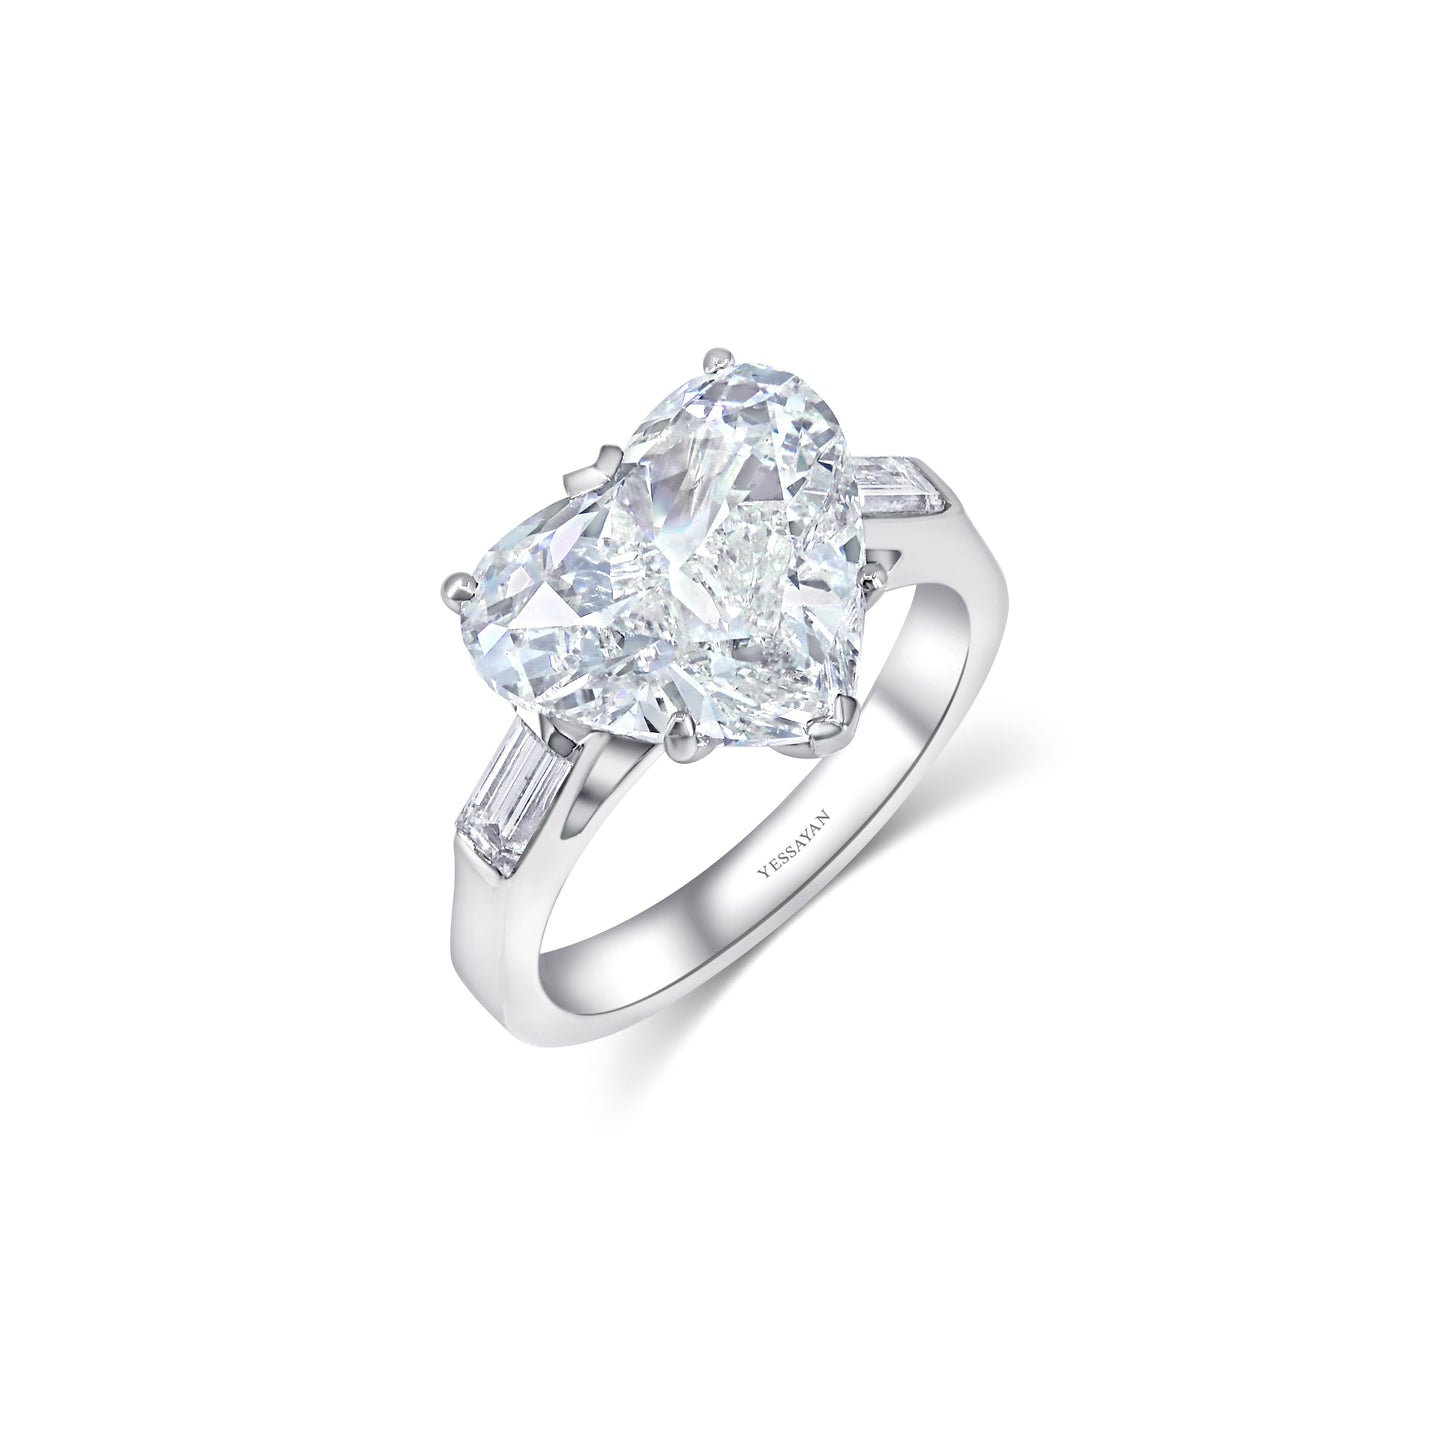 Almasaty 7.01 Carats Certified Heart Cut Solitaire Diamond Ring